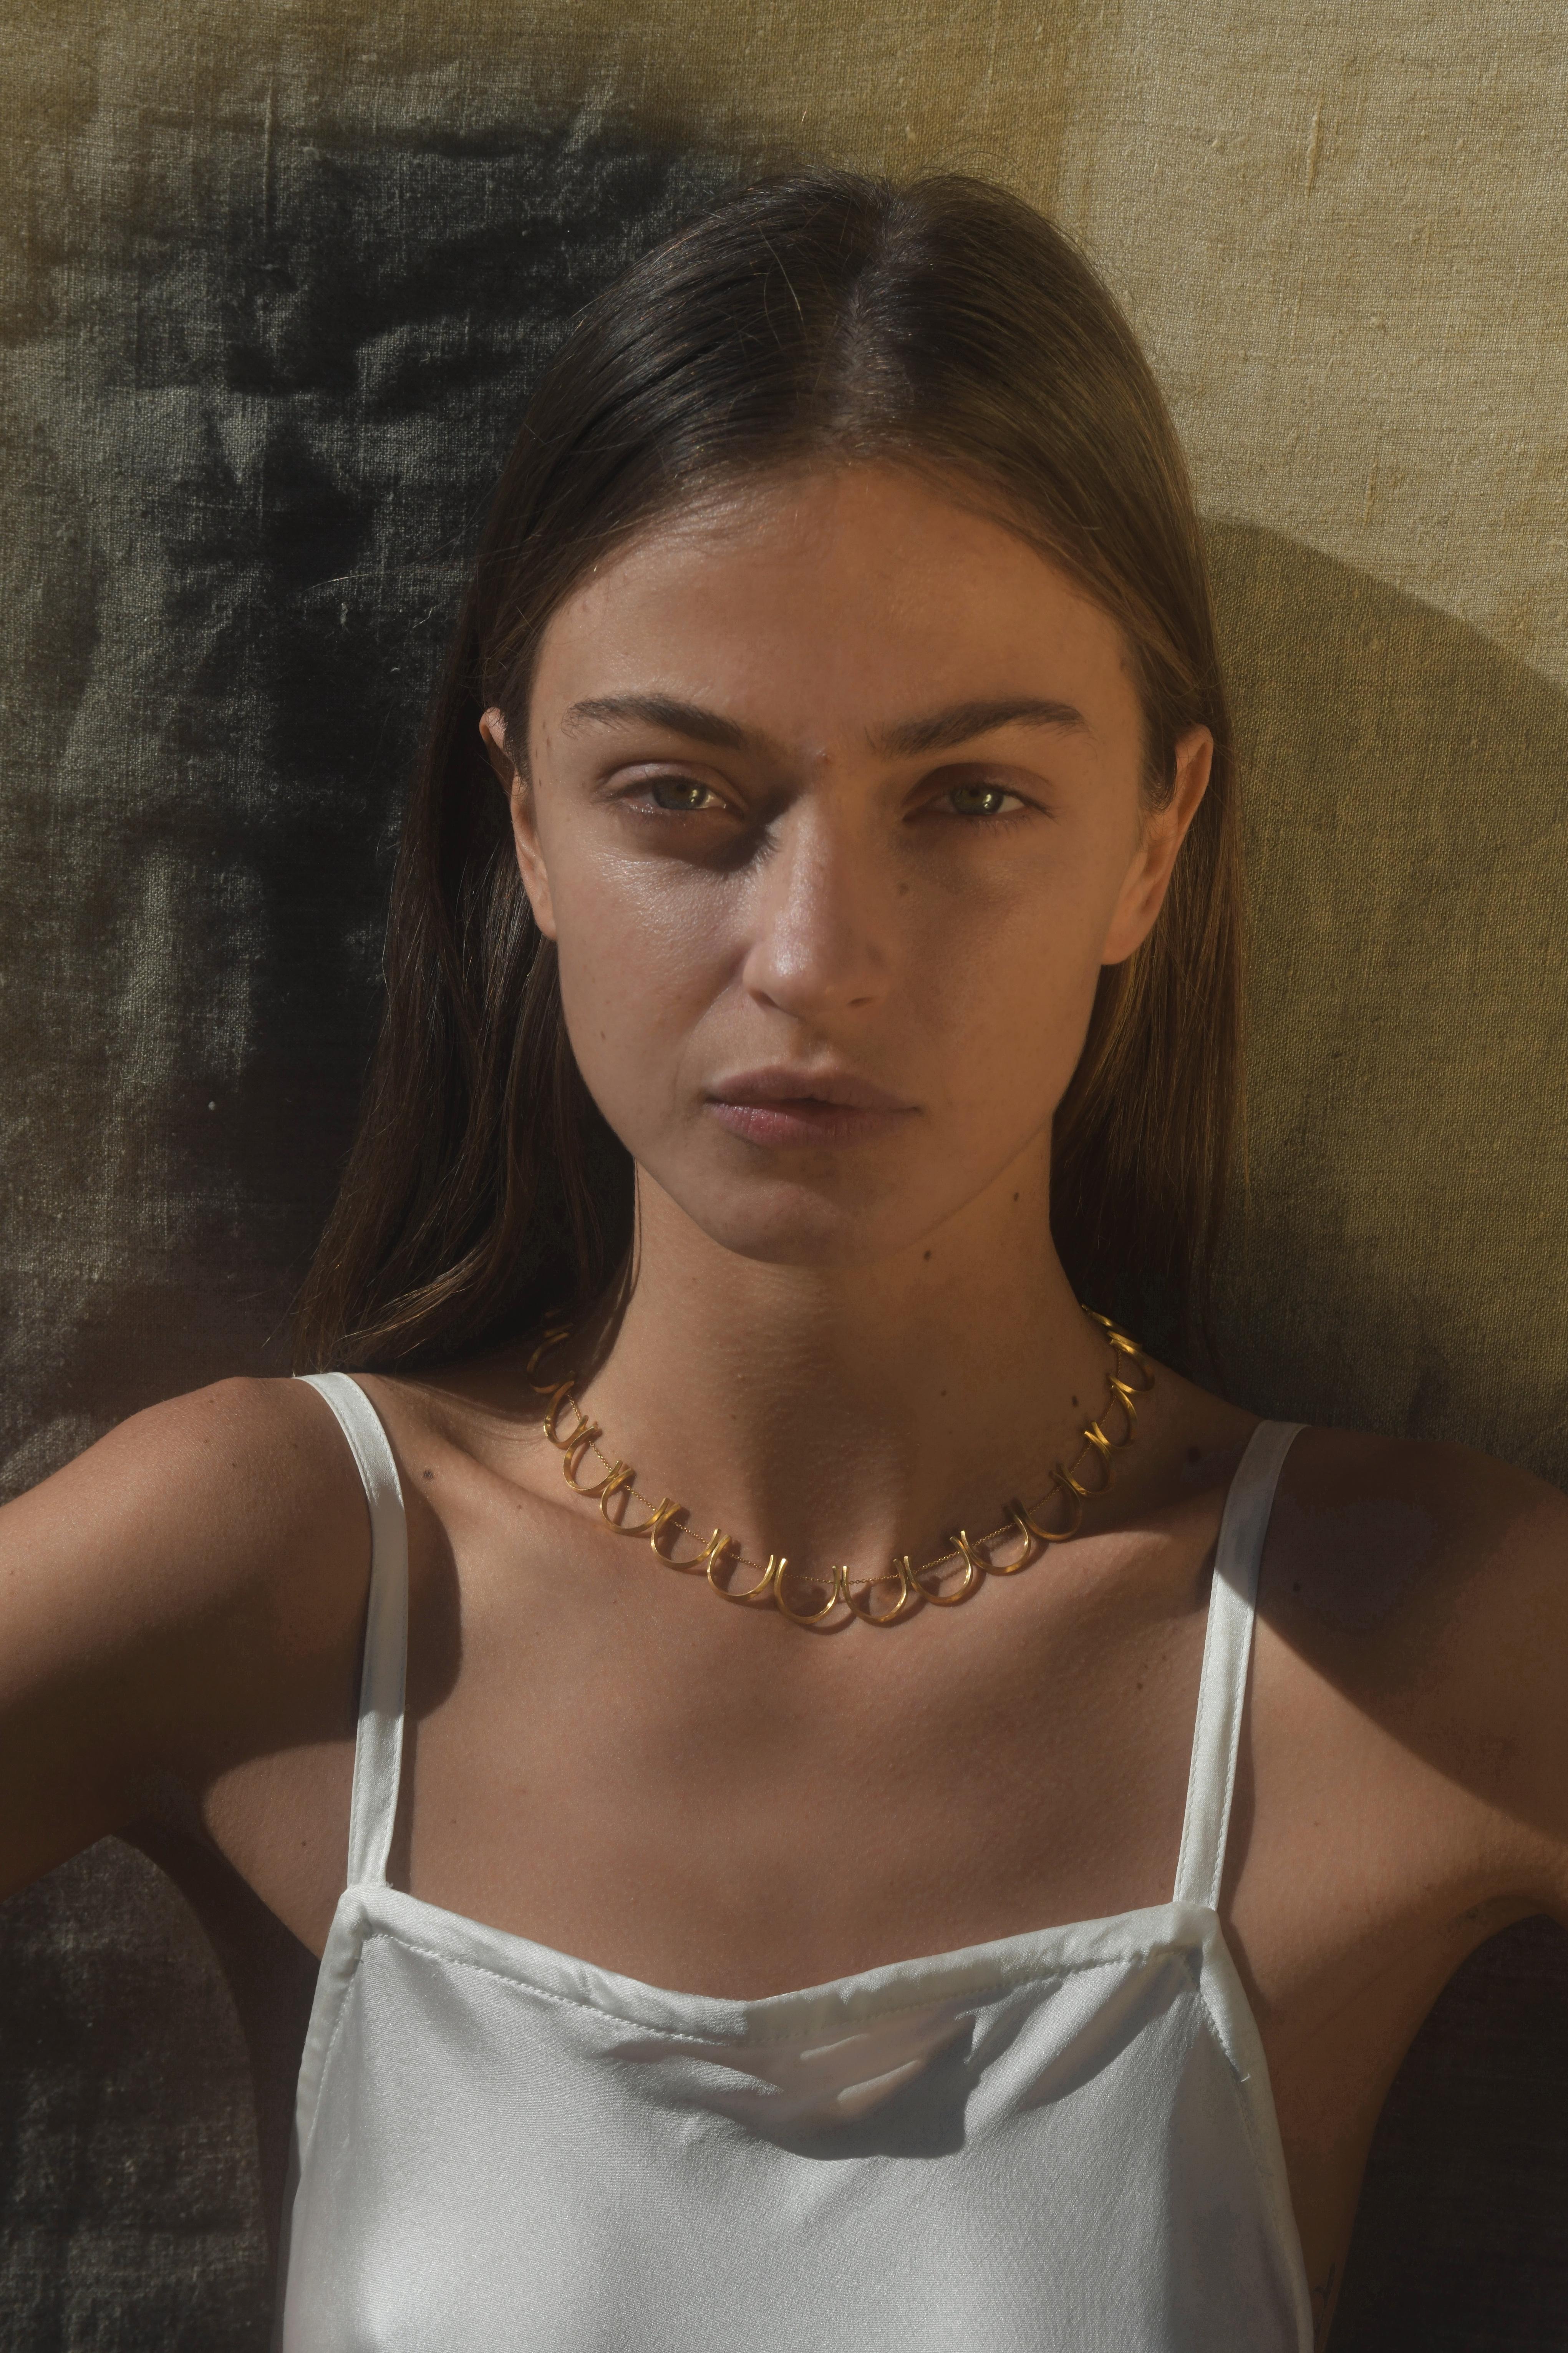 Timeless sterling silver 18k-gold plated necklace featuring round petal shaped motifs that go all around the neck. Every motif has been individually hand-crafted, finished and threaded to the chain by local skilled Greek craftsmen.

This piece is